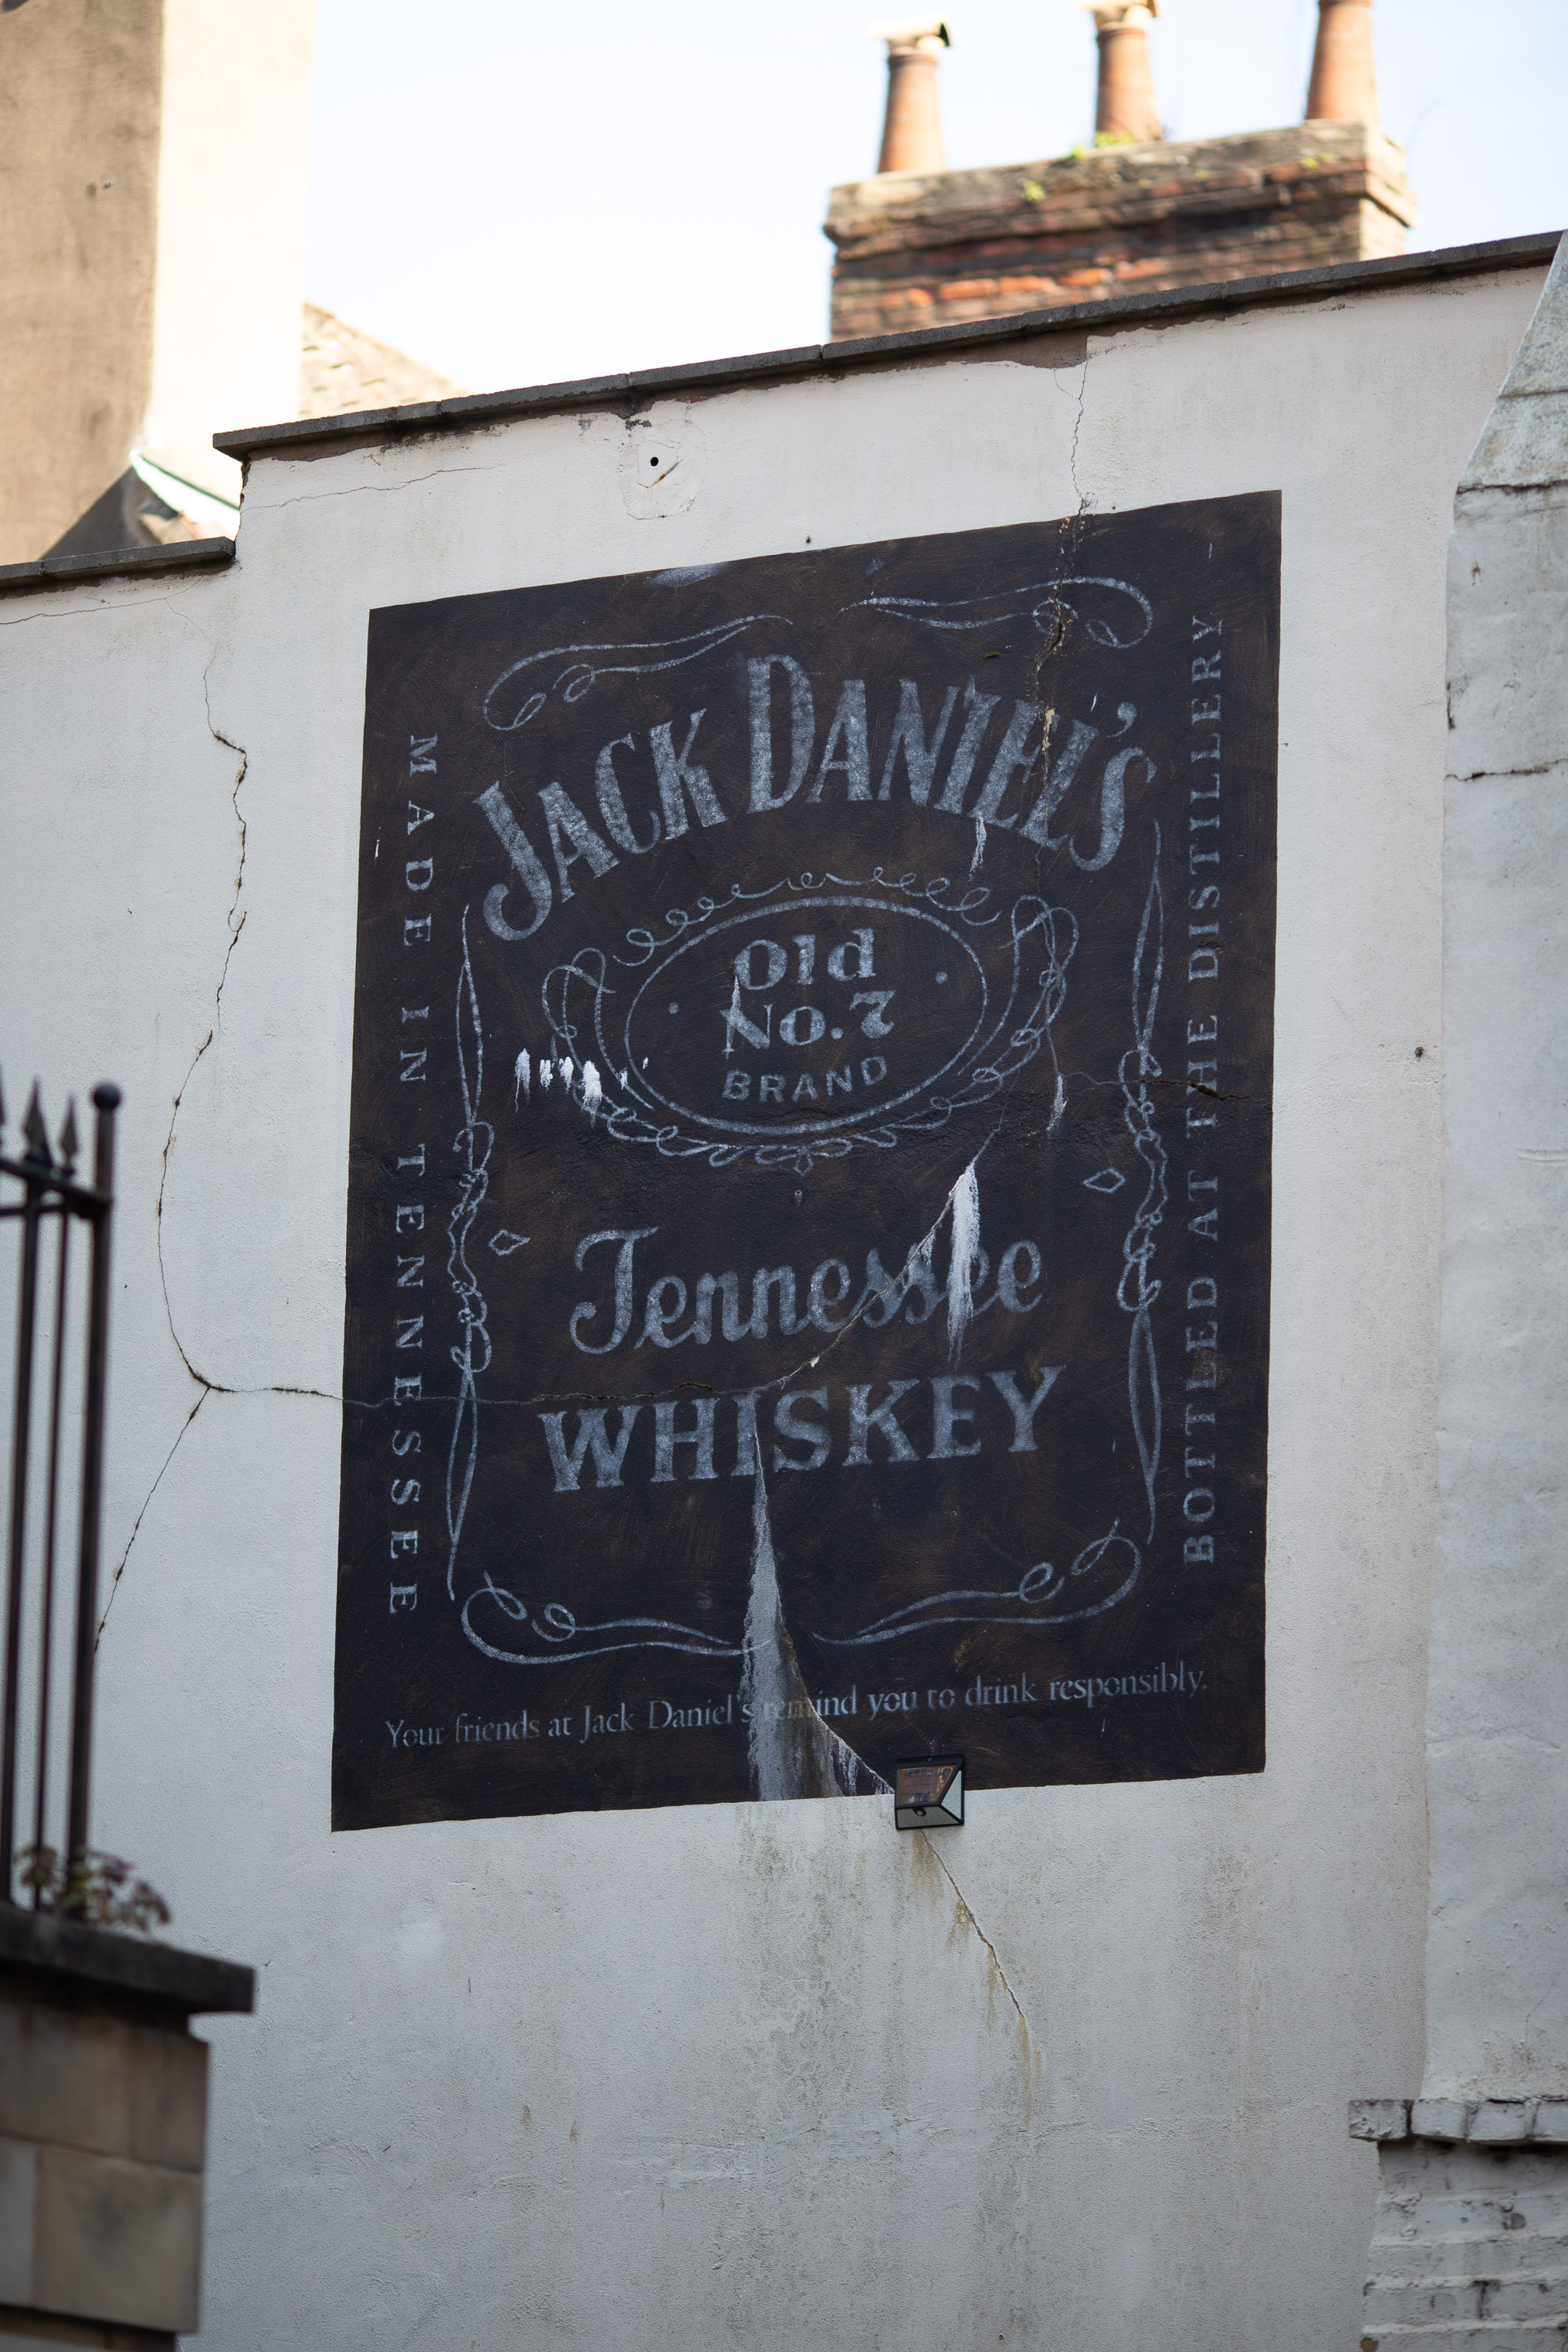 Jack Daniel's
I had this on a t-shirt when I was a student. Been a long time since I had any JD...
